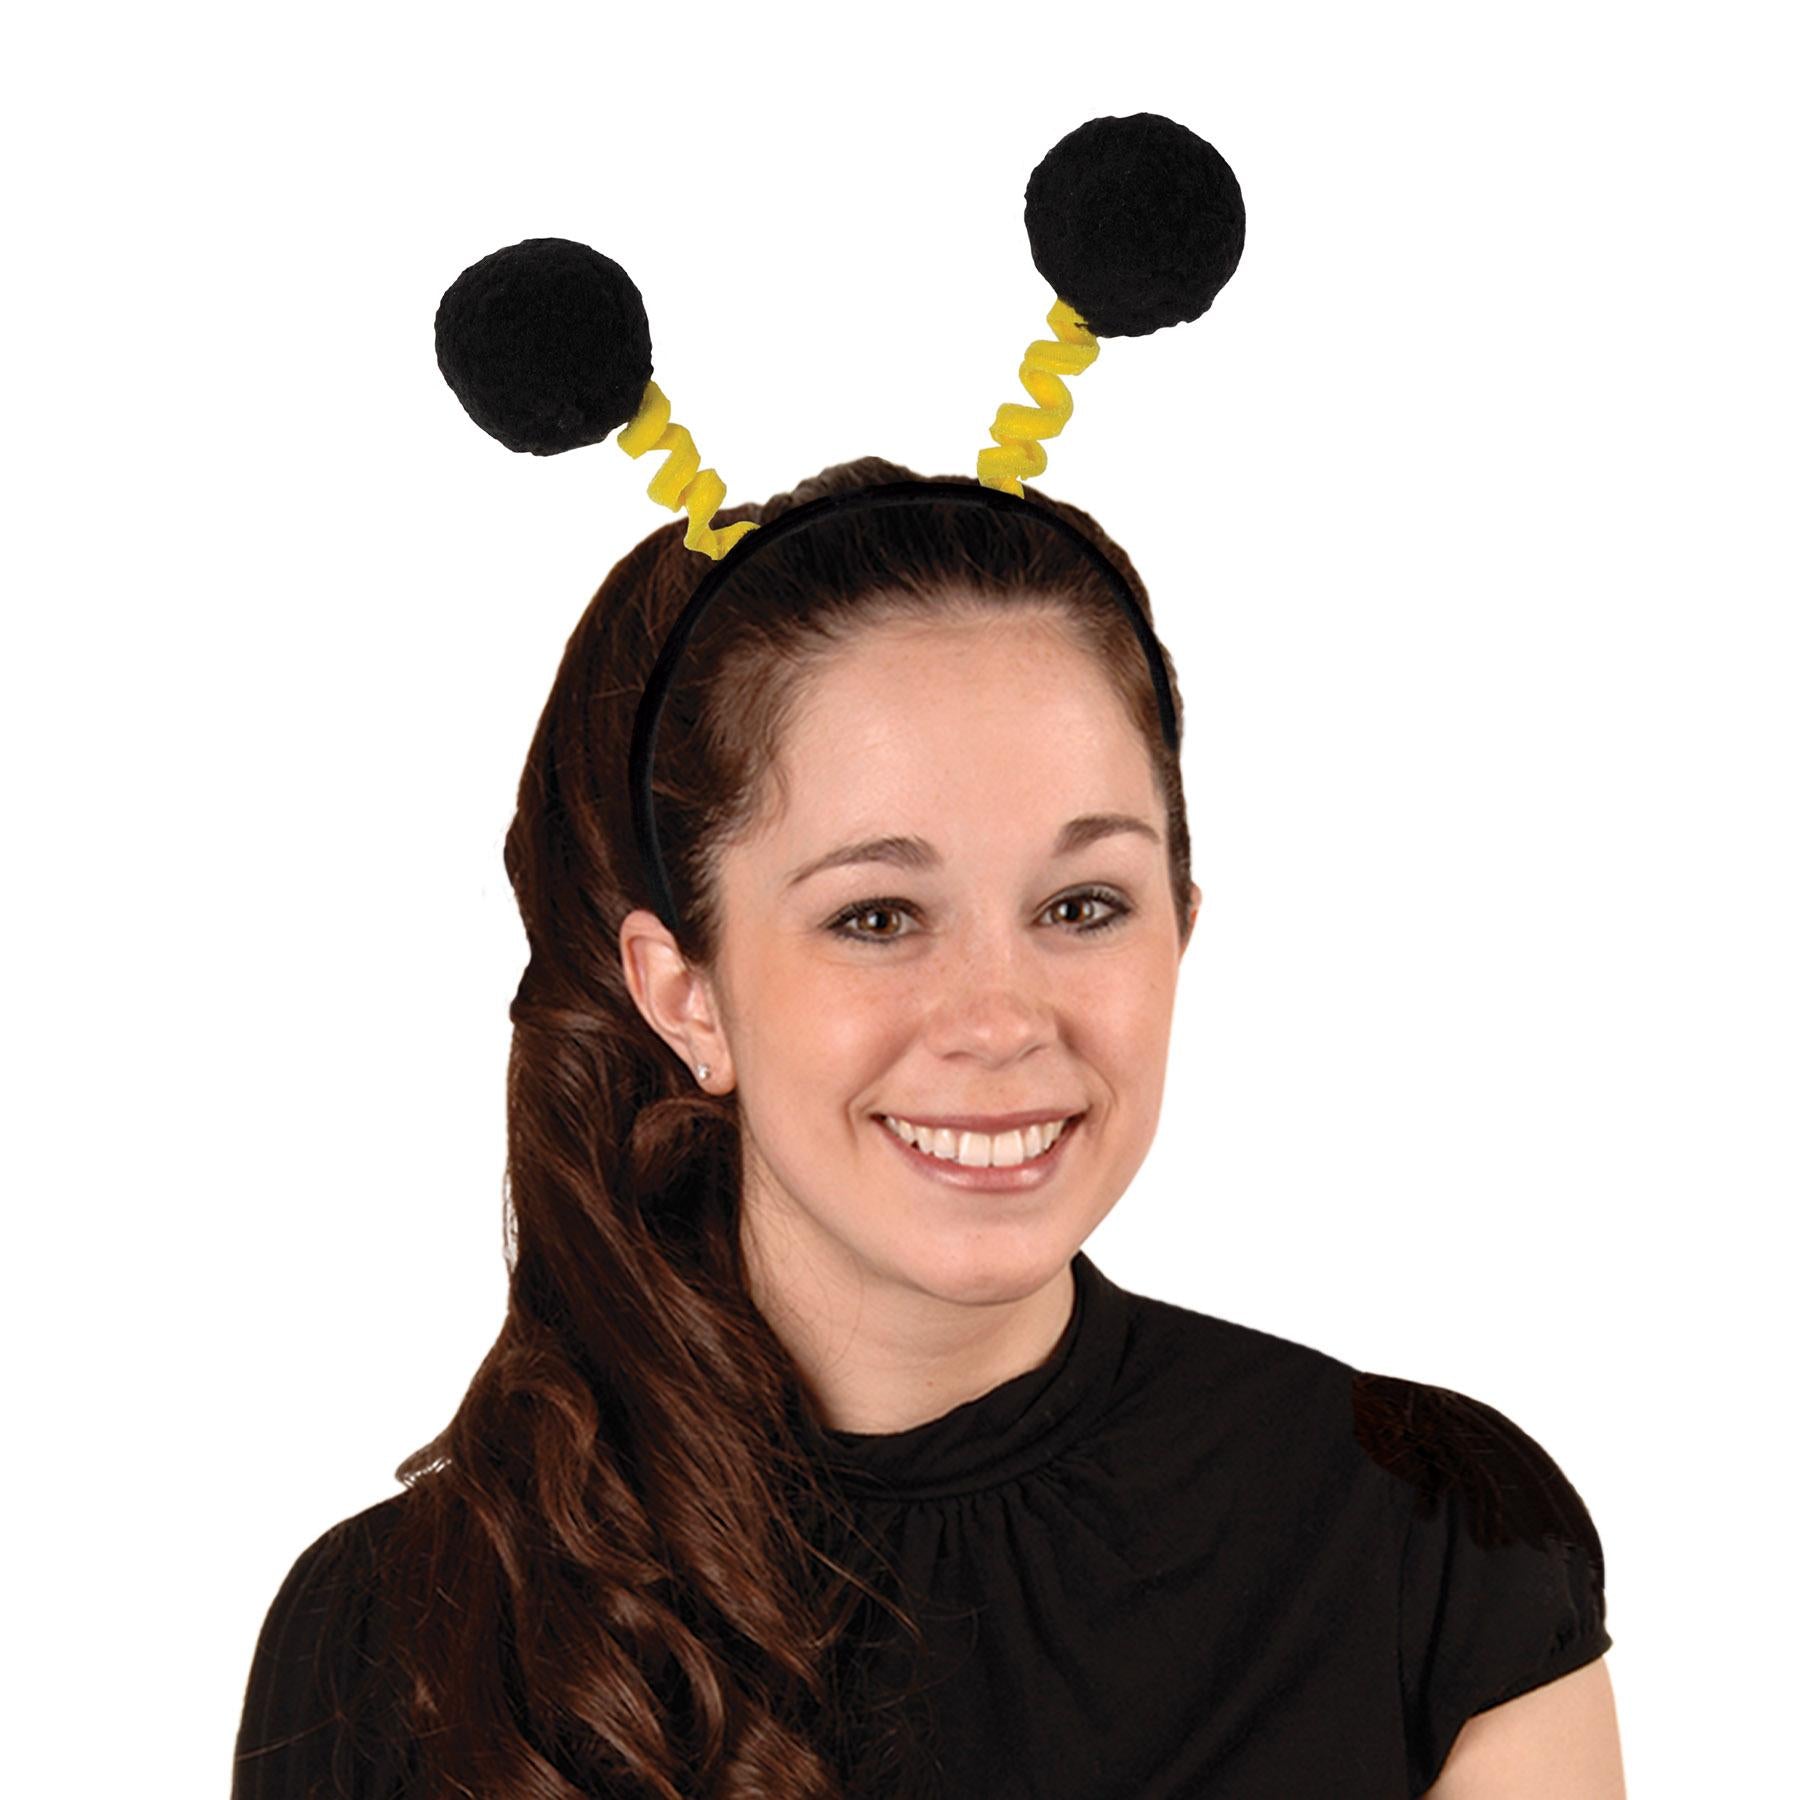 Beistle Soft-Touch Pom-Pom Boppers - black & yellow